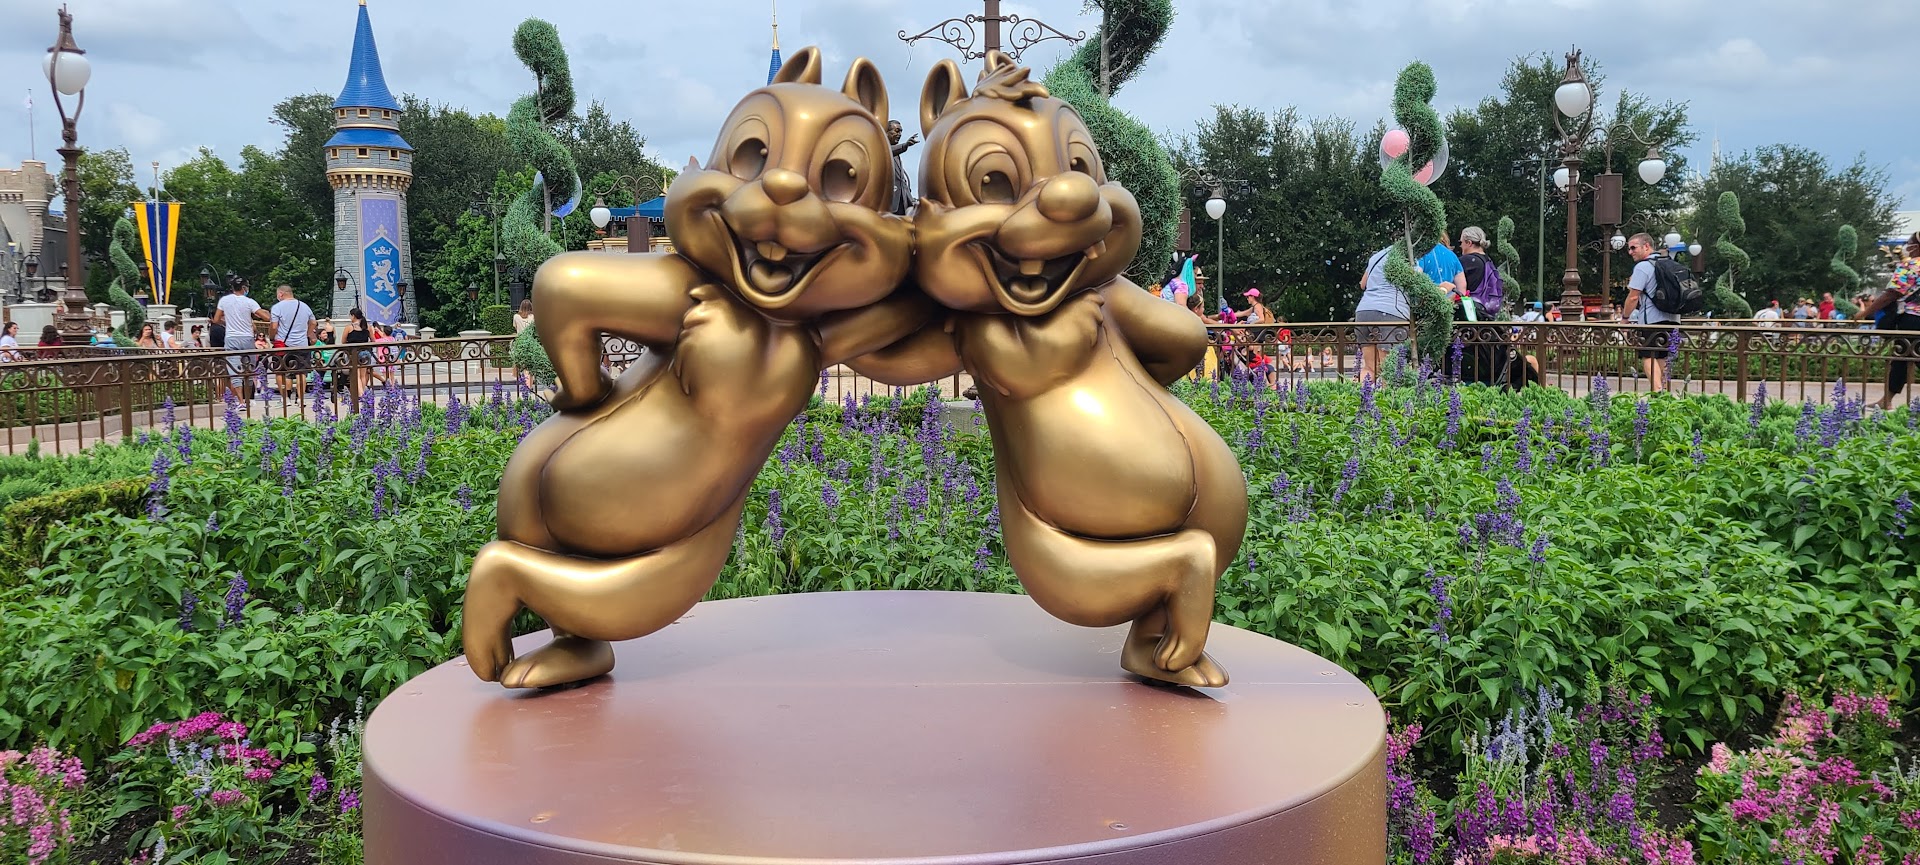 Complete Guide To Planning A Disney World Vacation Tips 4